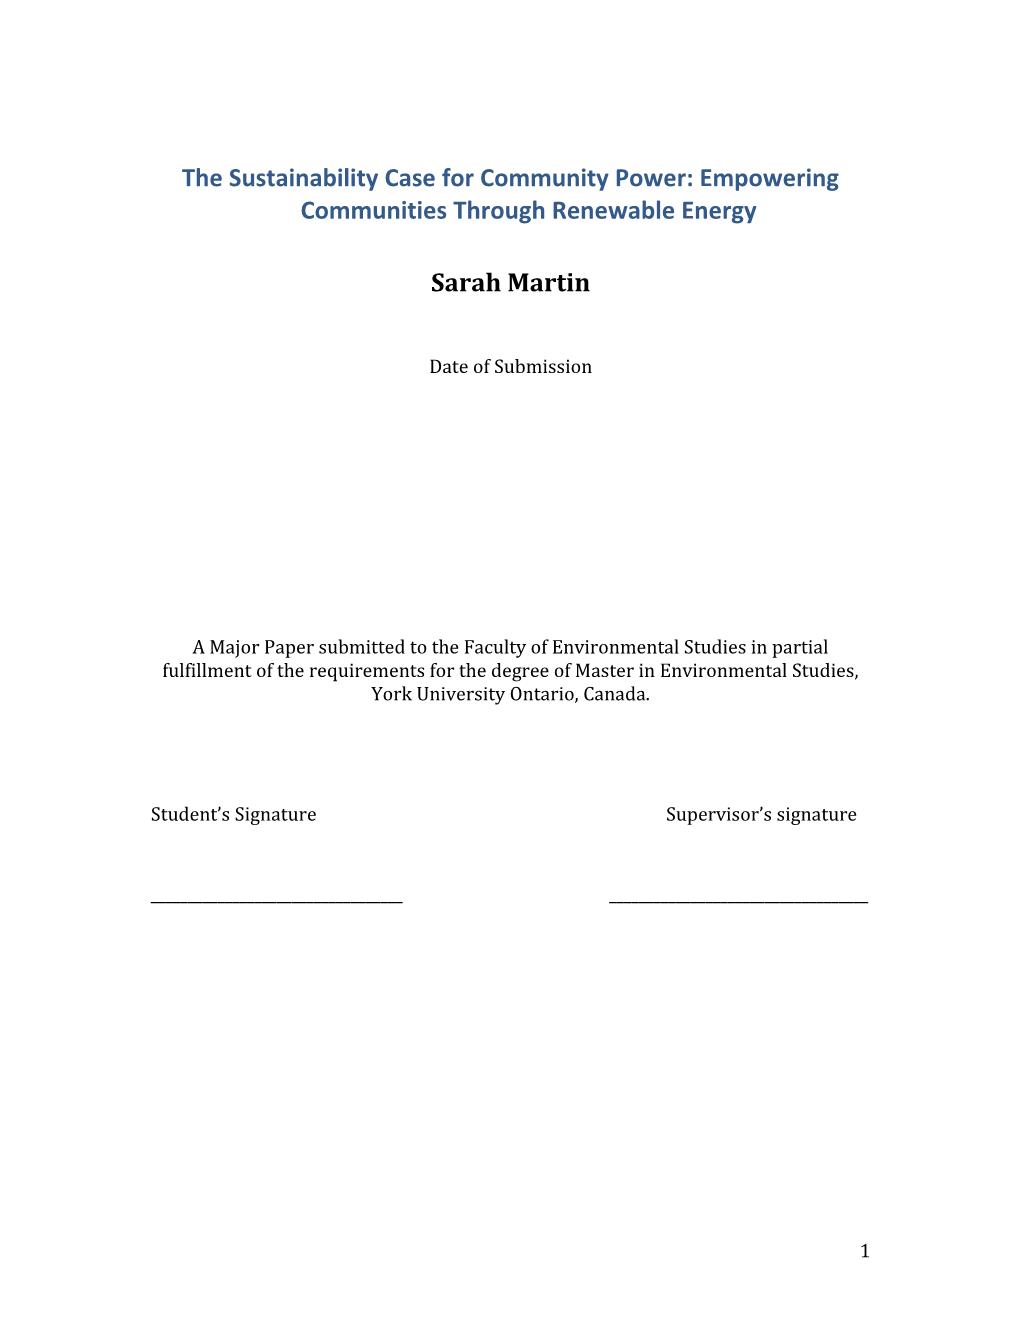 The Sustainability Case for Community Power: Empowering Communities Through Renewable Energy